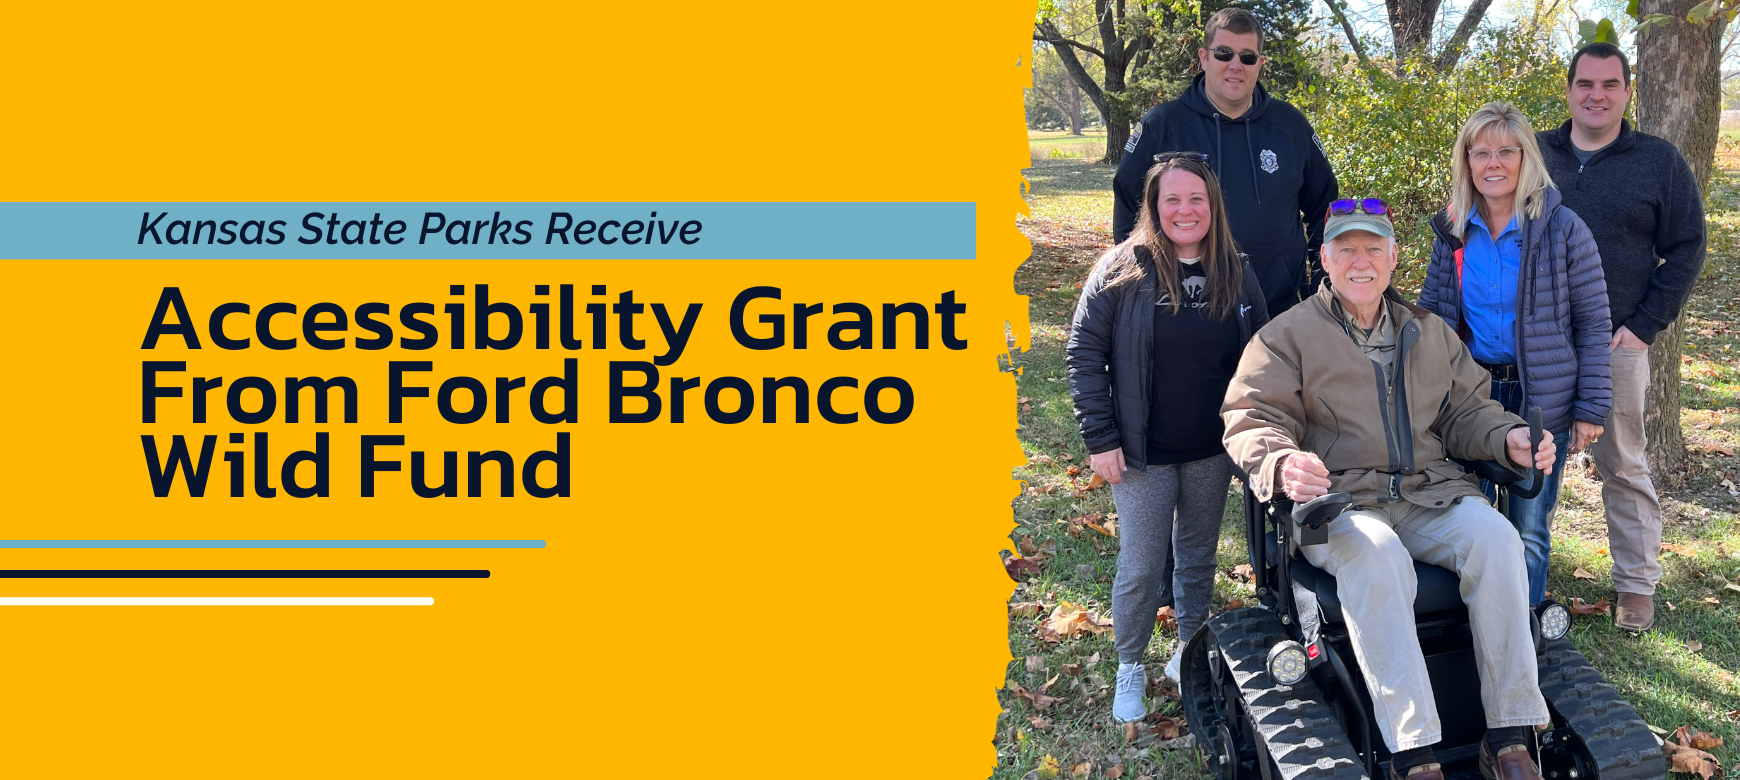 Kansas State Parks Receive Accessibility Grant From Ford Bronco Wild Fund